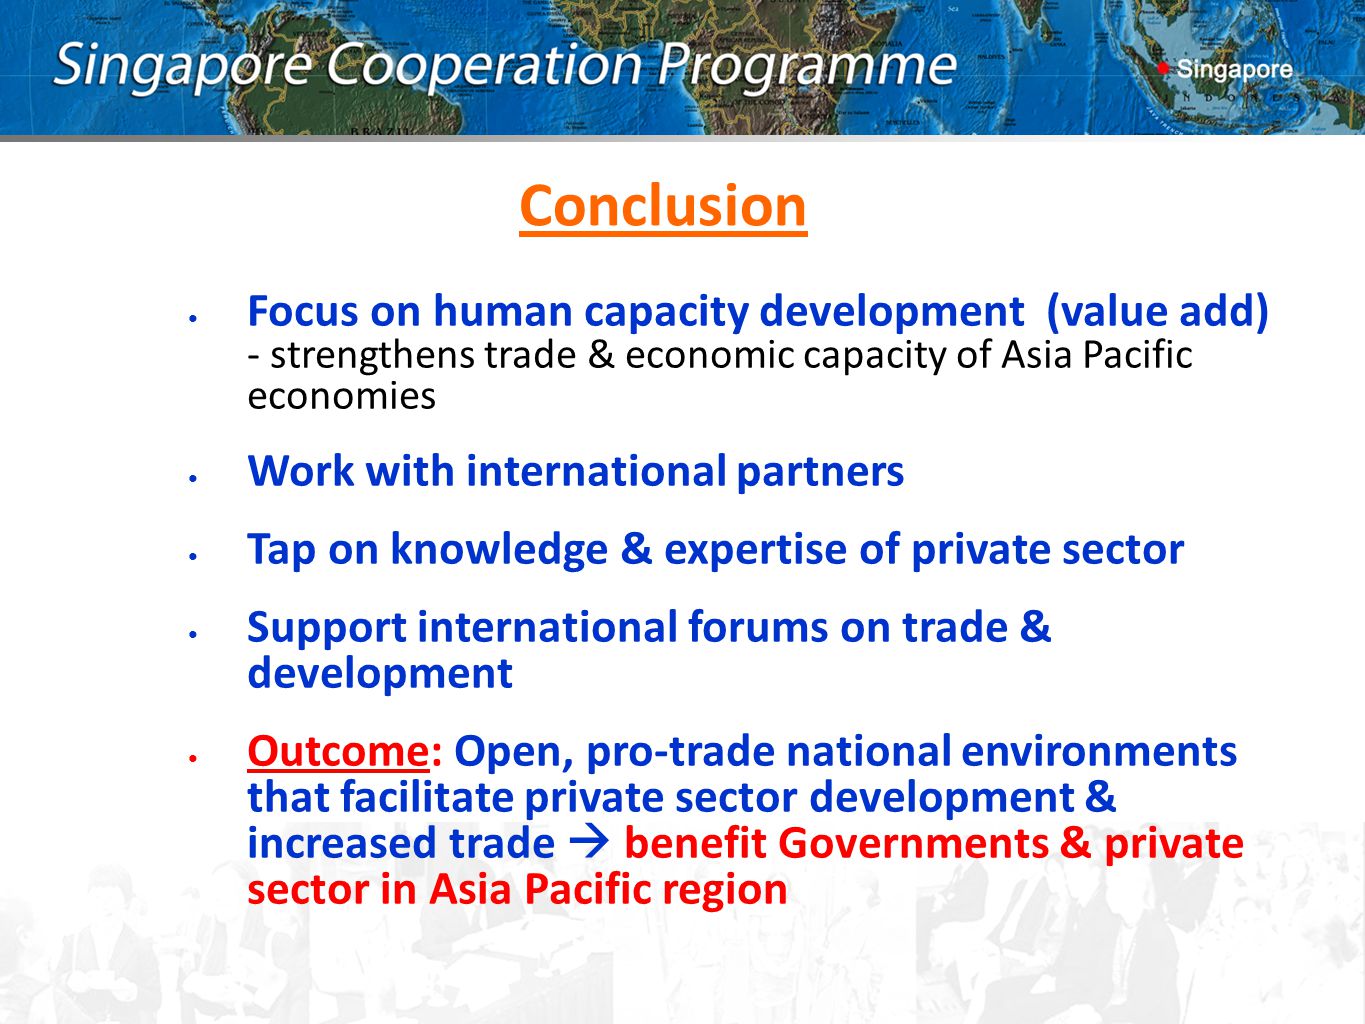 Conclusion Focus on human capacity development (value add) - strengthens trade & economic capacity of Asia Pacific economies Work with international partners Tap on knowledge & expertise of private sector Support international forums on trade & development Outcome: Open, pro-trade national environments that facilitate private sector development & increased trade  benefit Governments & private sector in Asia Pacific region